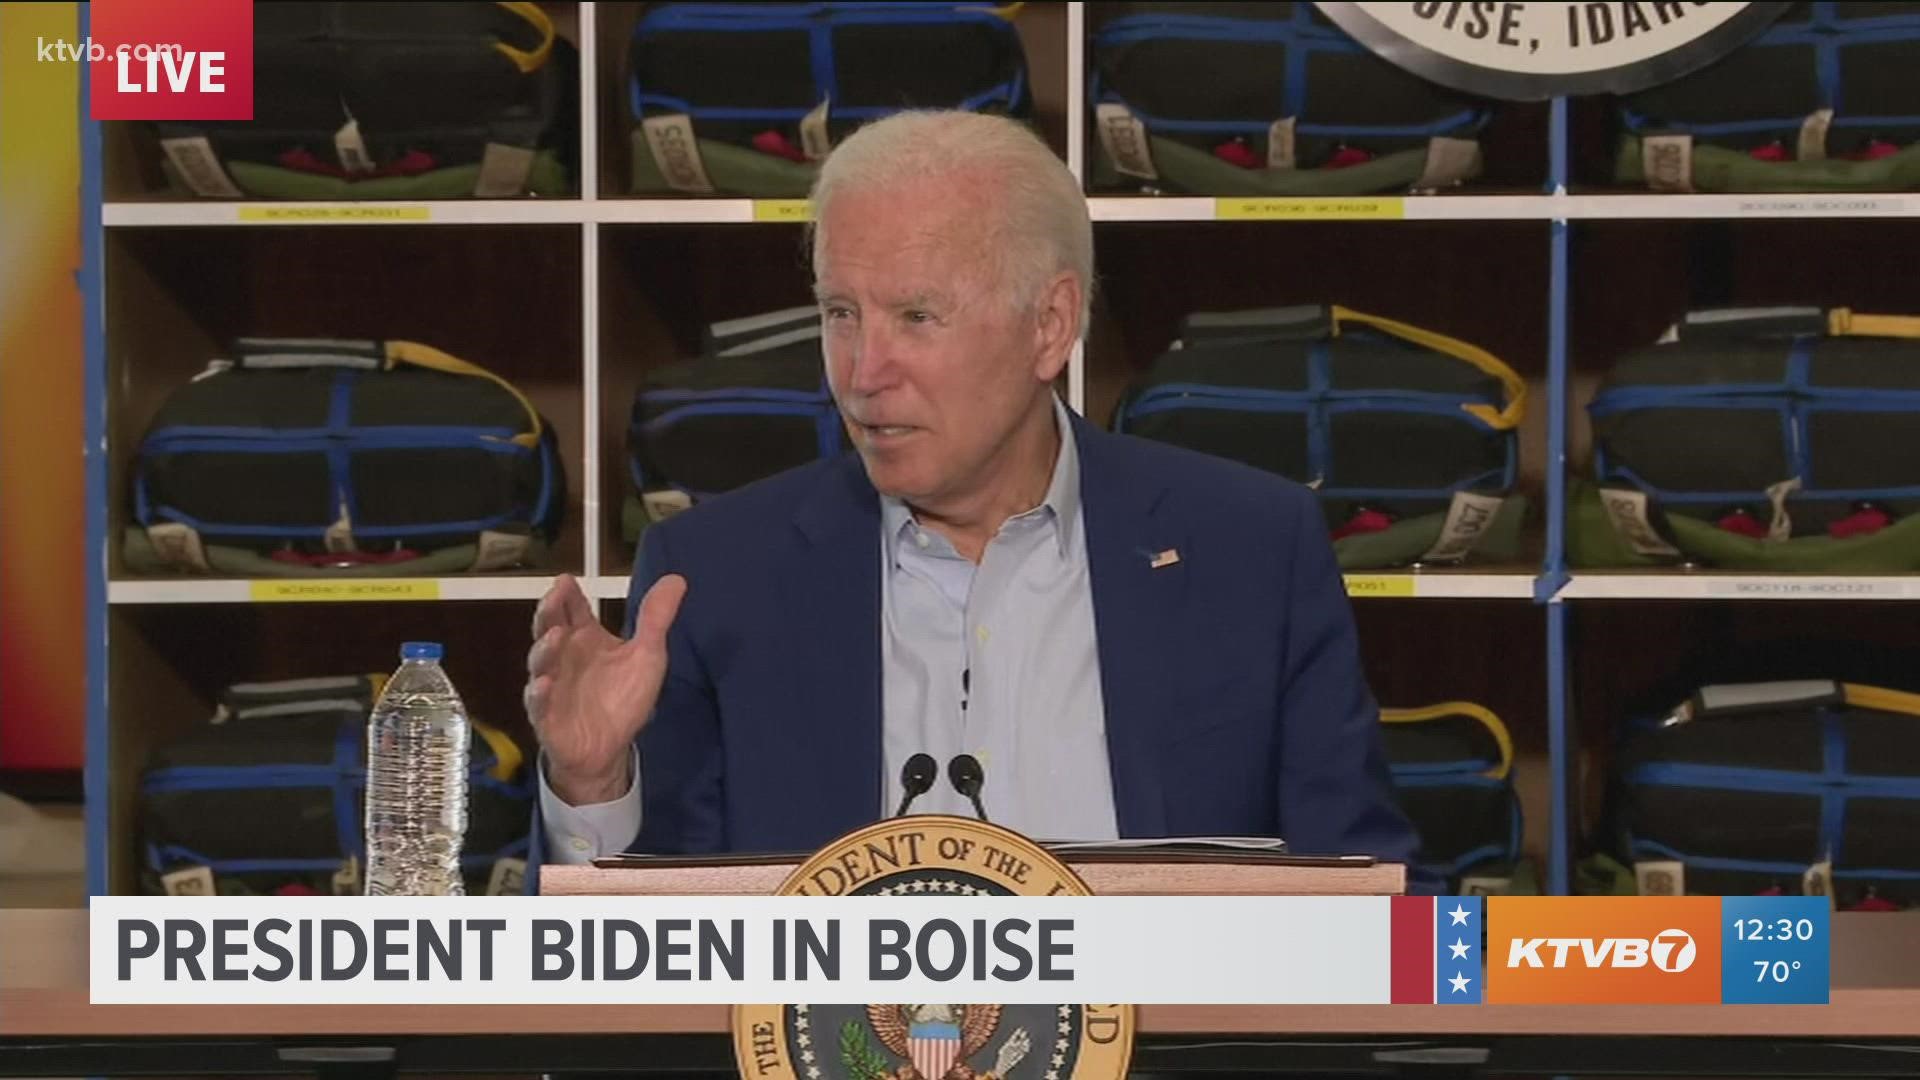 Biden explained that his deceased wife and he wanted to move to Idaho.